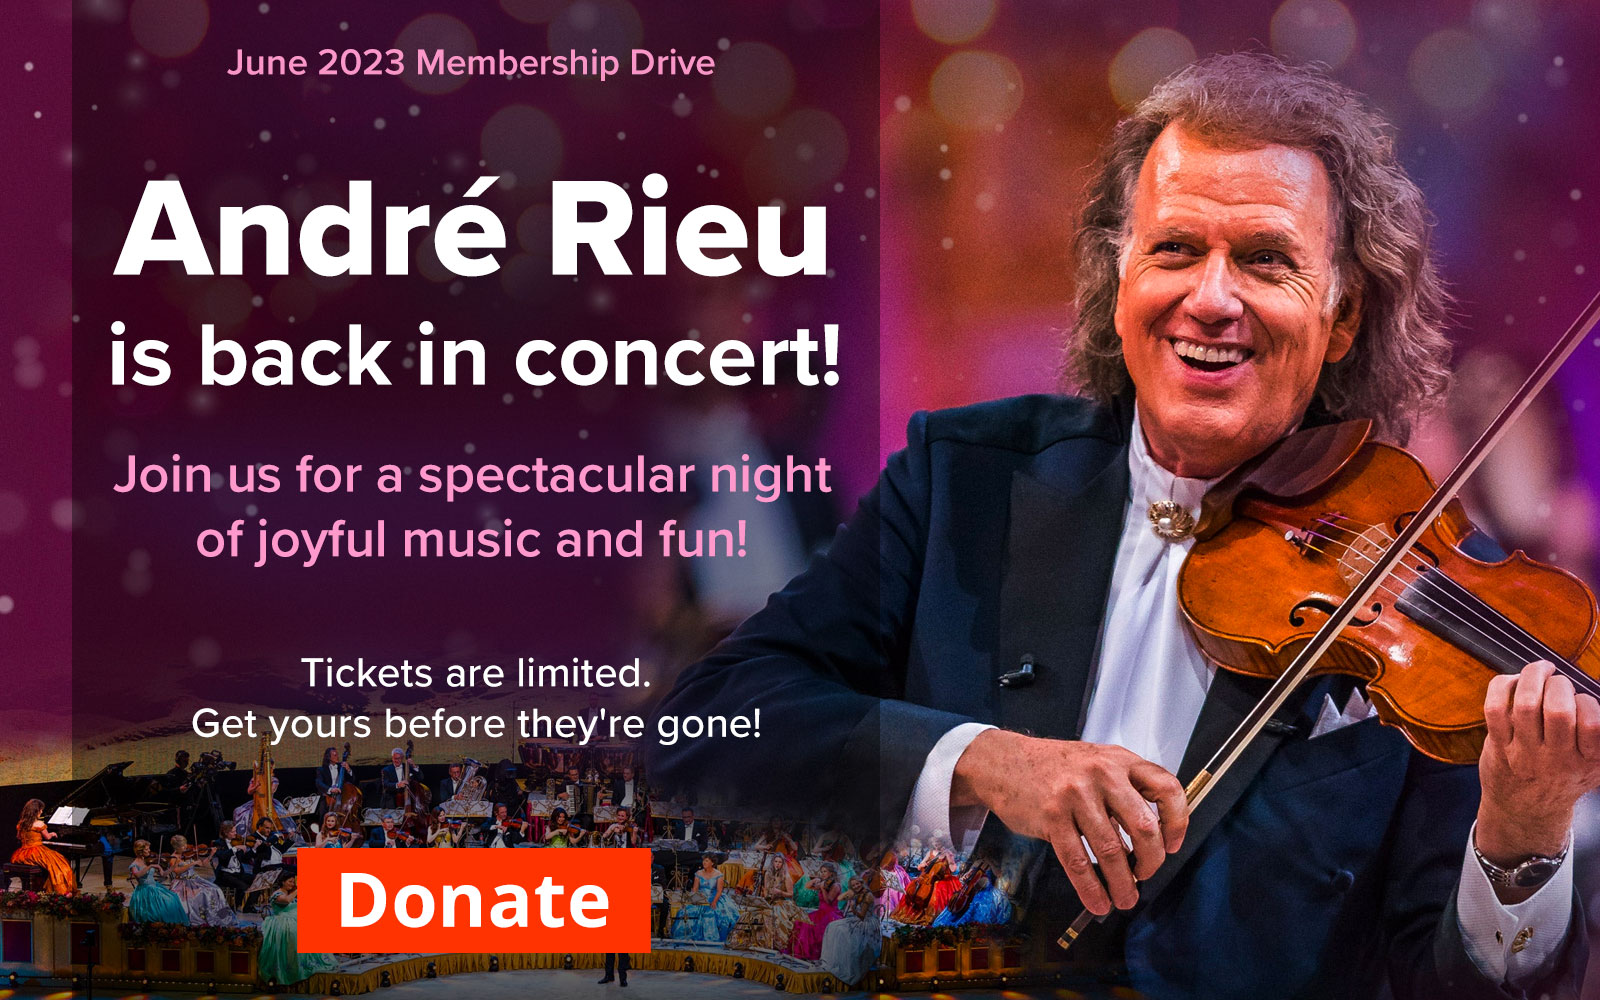 Pledge to get tickets to see Andre Rieu live!